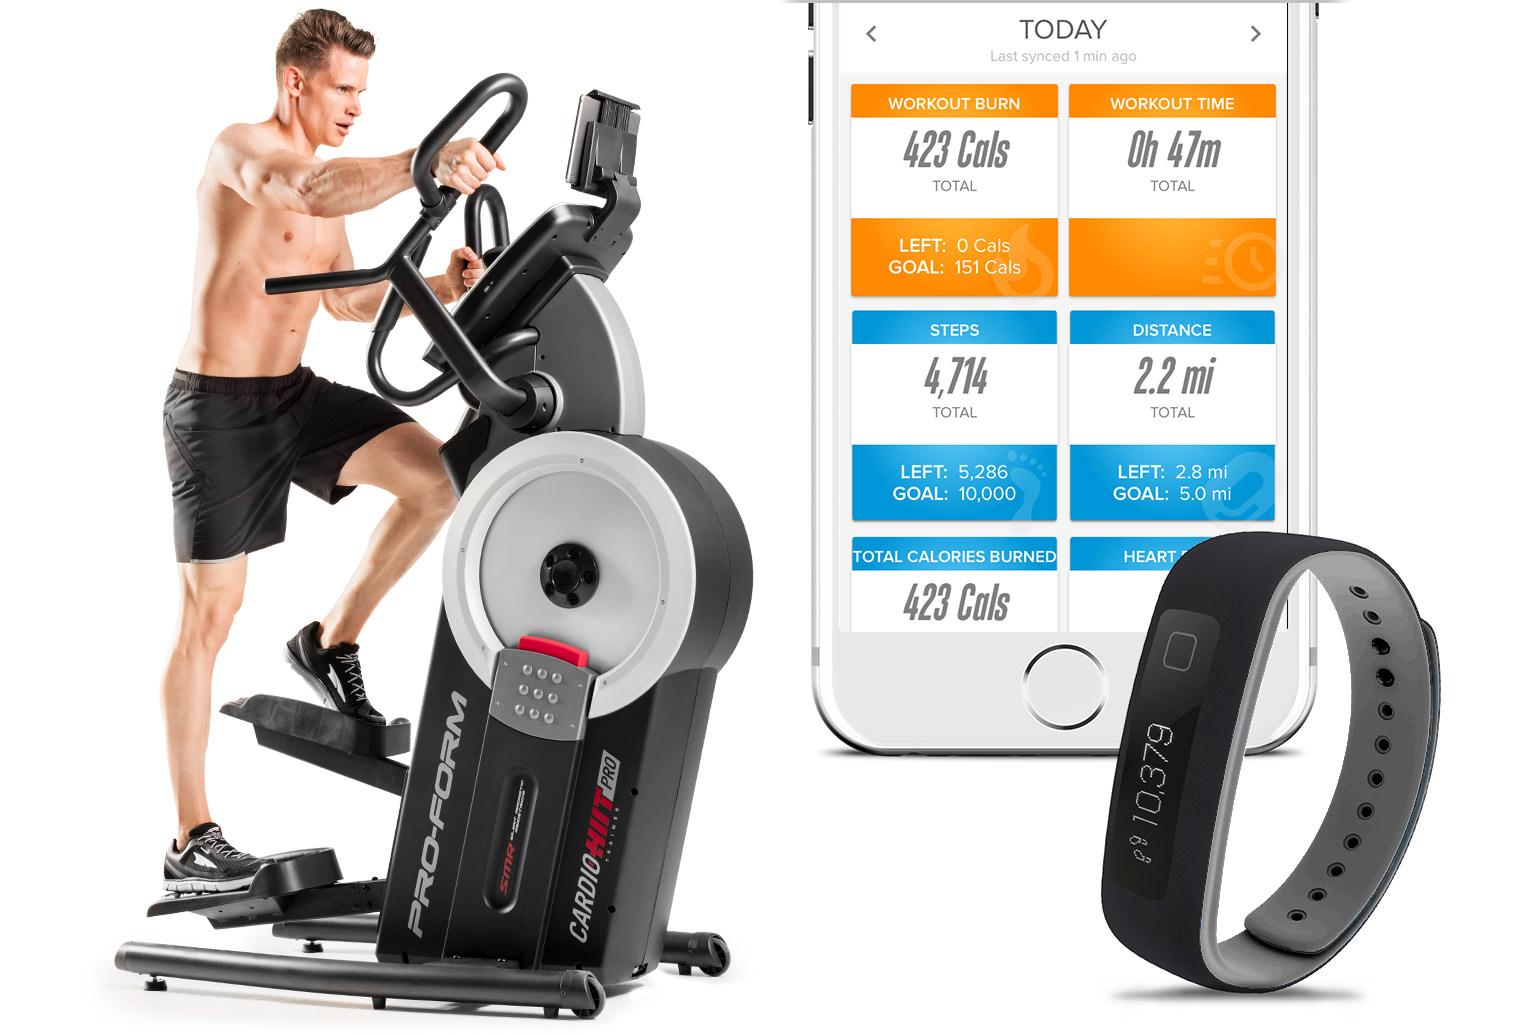 Trck your workout using wearables and equipment